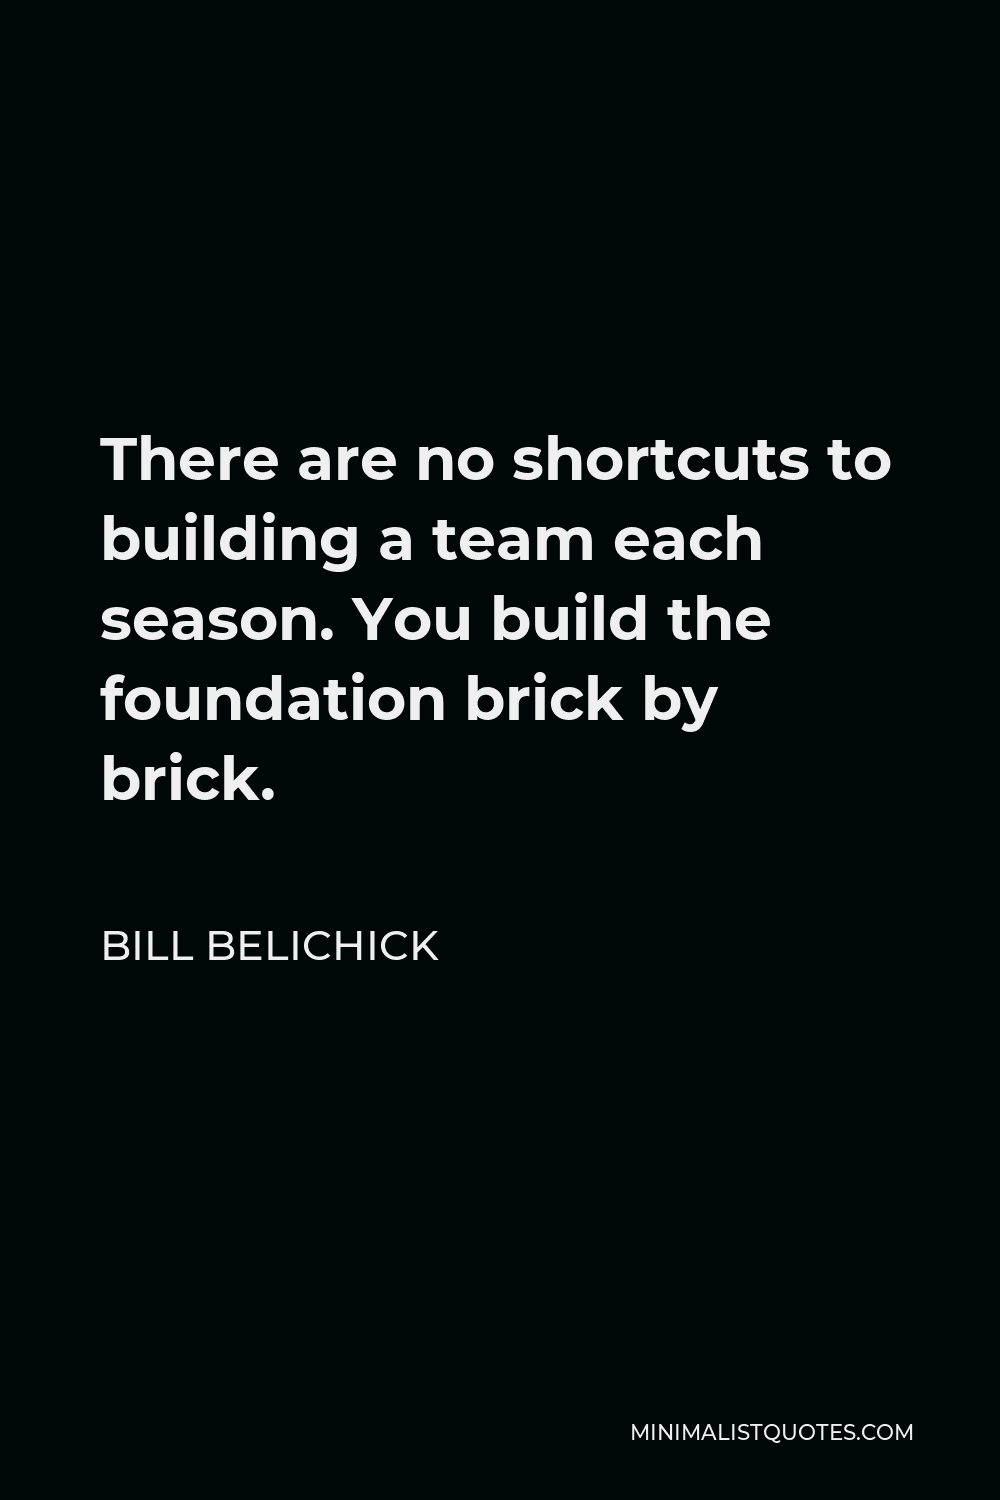 Bill Belichick Quote - There are no shortcuts to building a team each season. You build the foundation brick by brick.